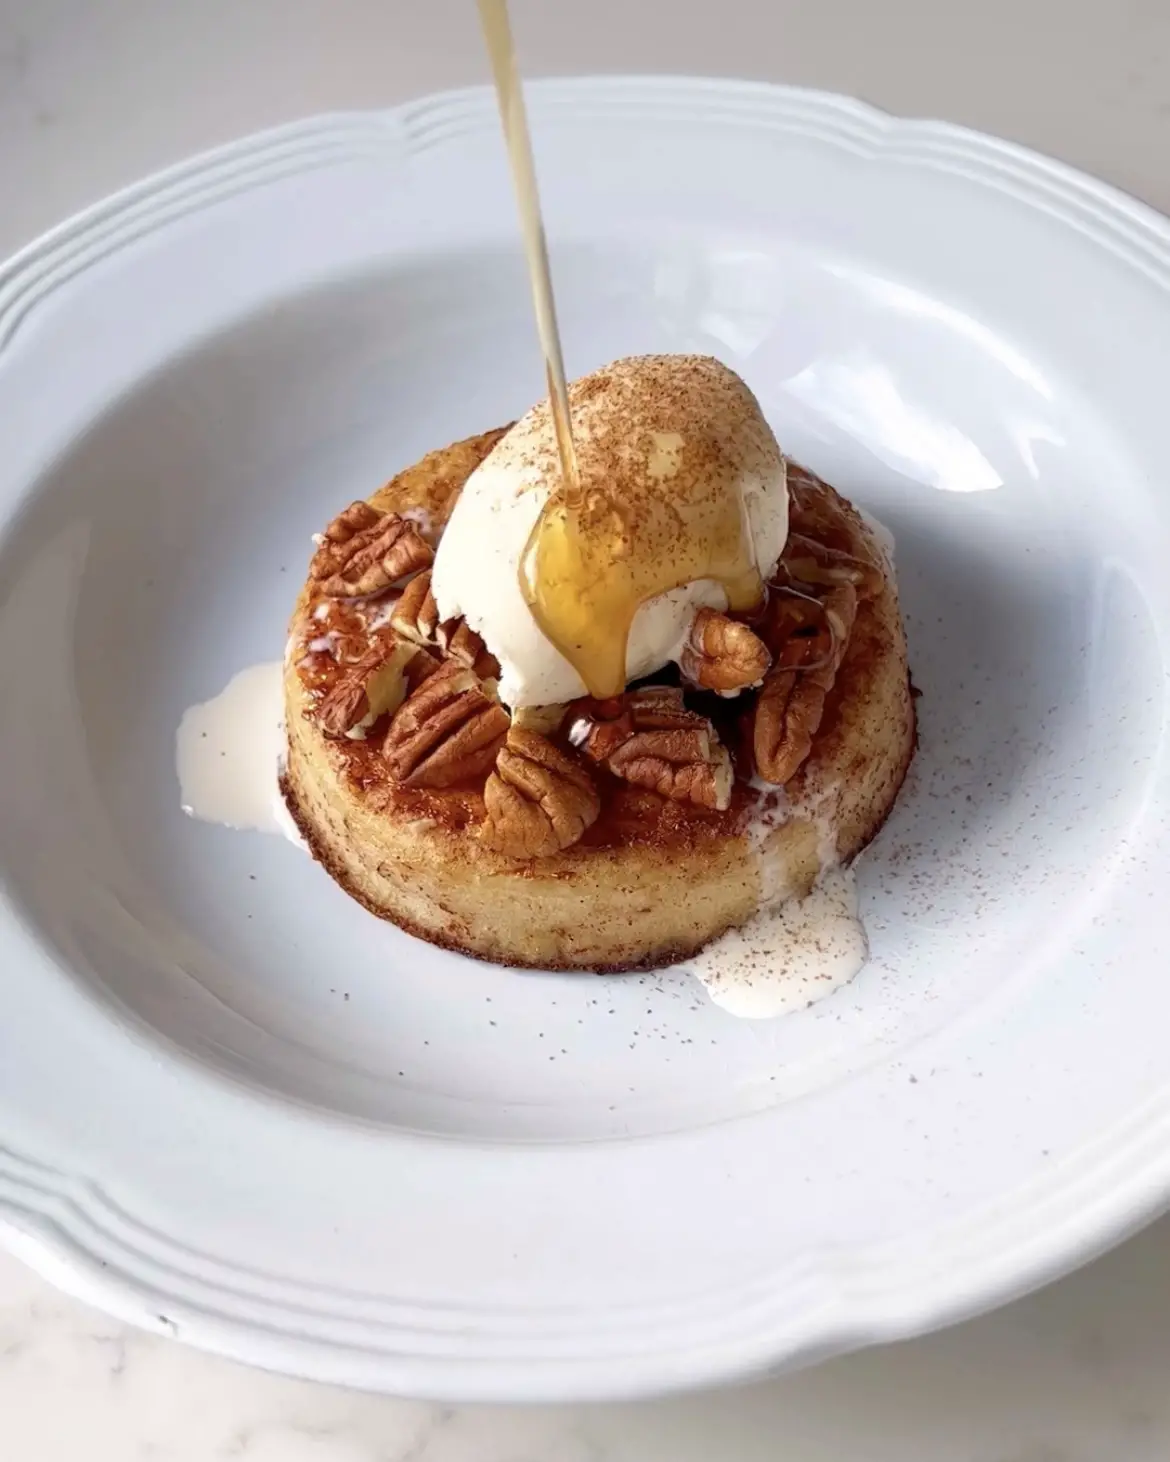 Decorate the french toast crumpets